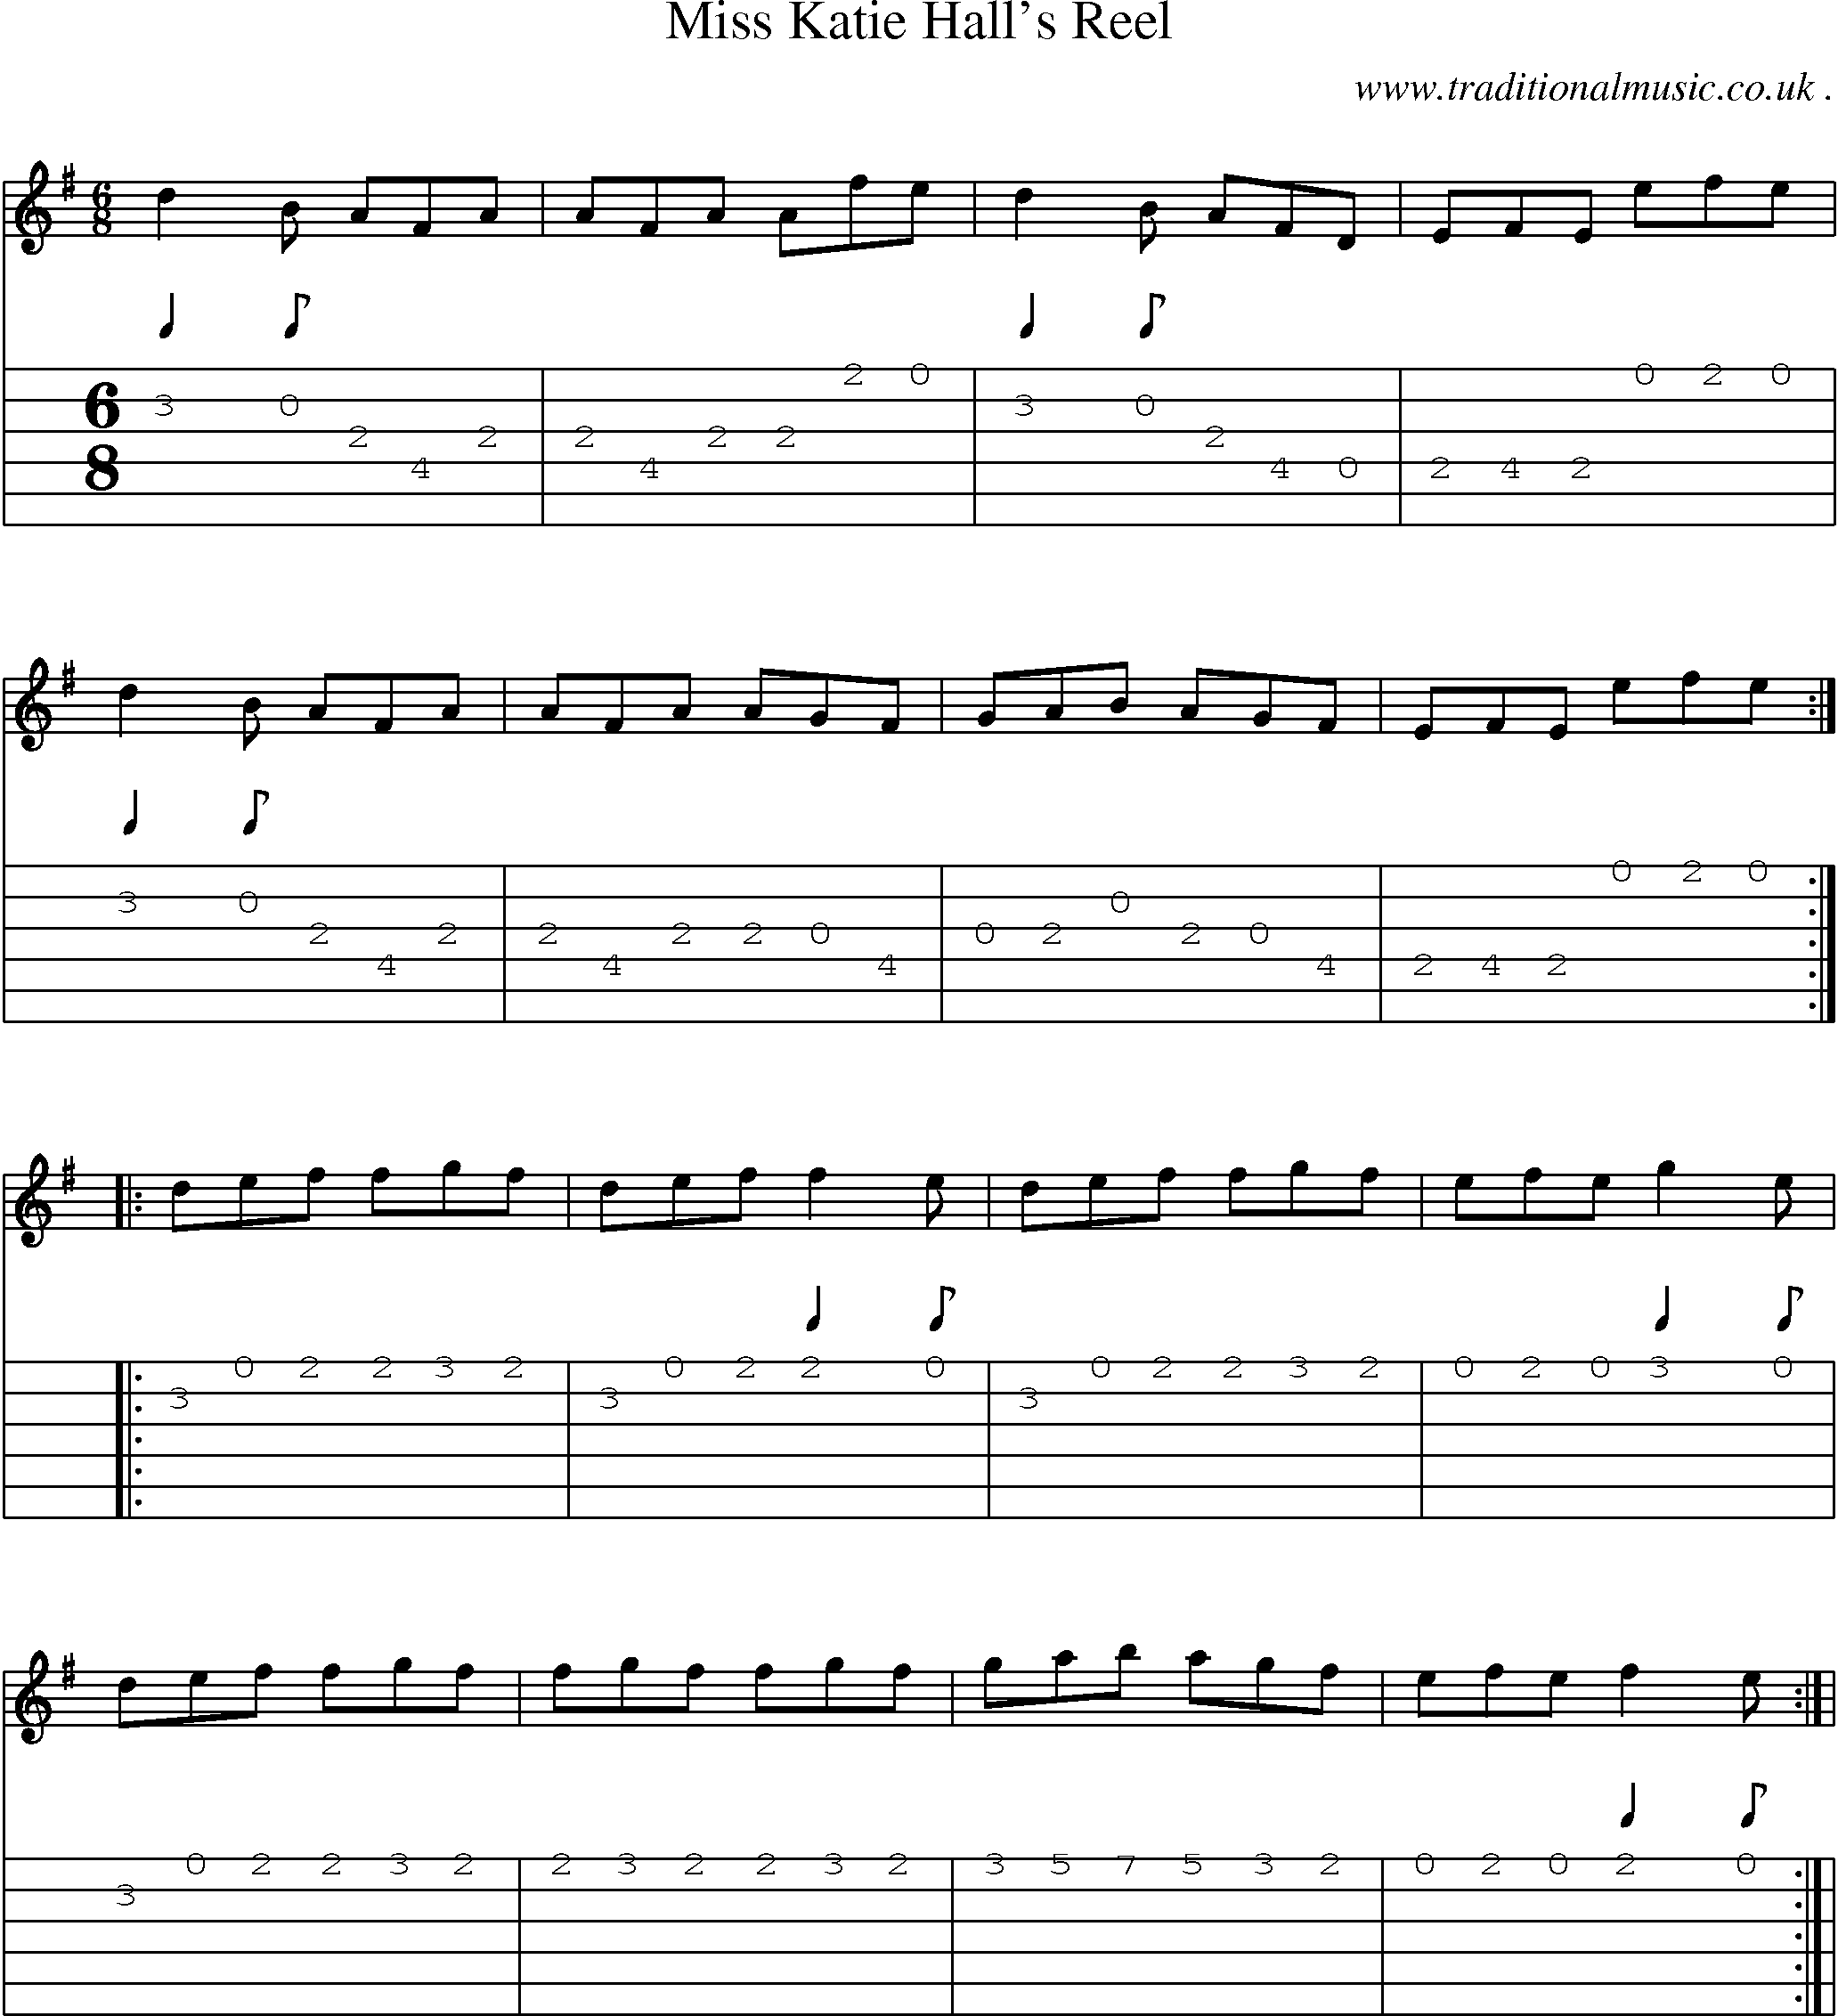 Sheet-Music and Guitar Tabs for Miss Katie Halls Reel